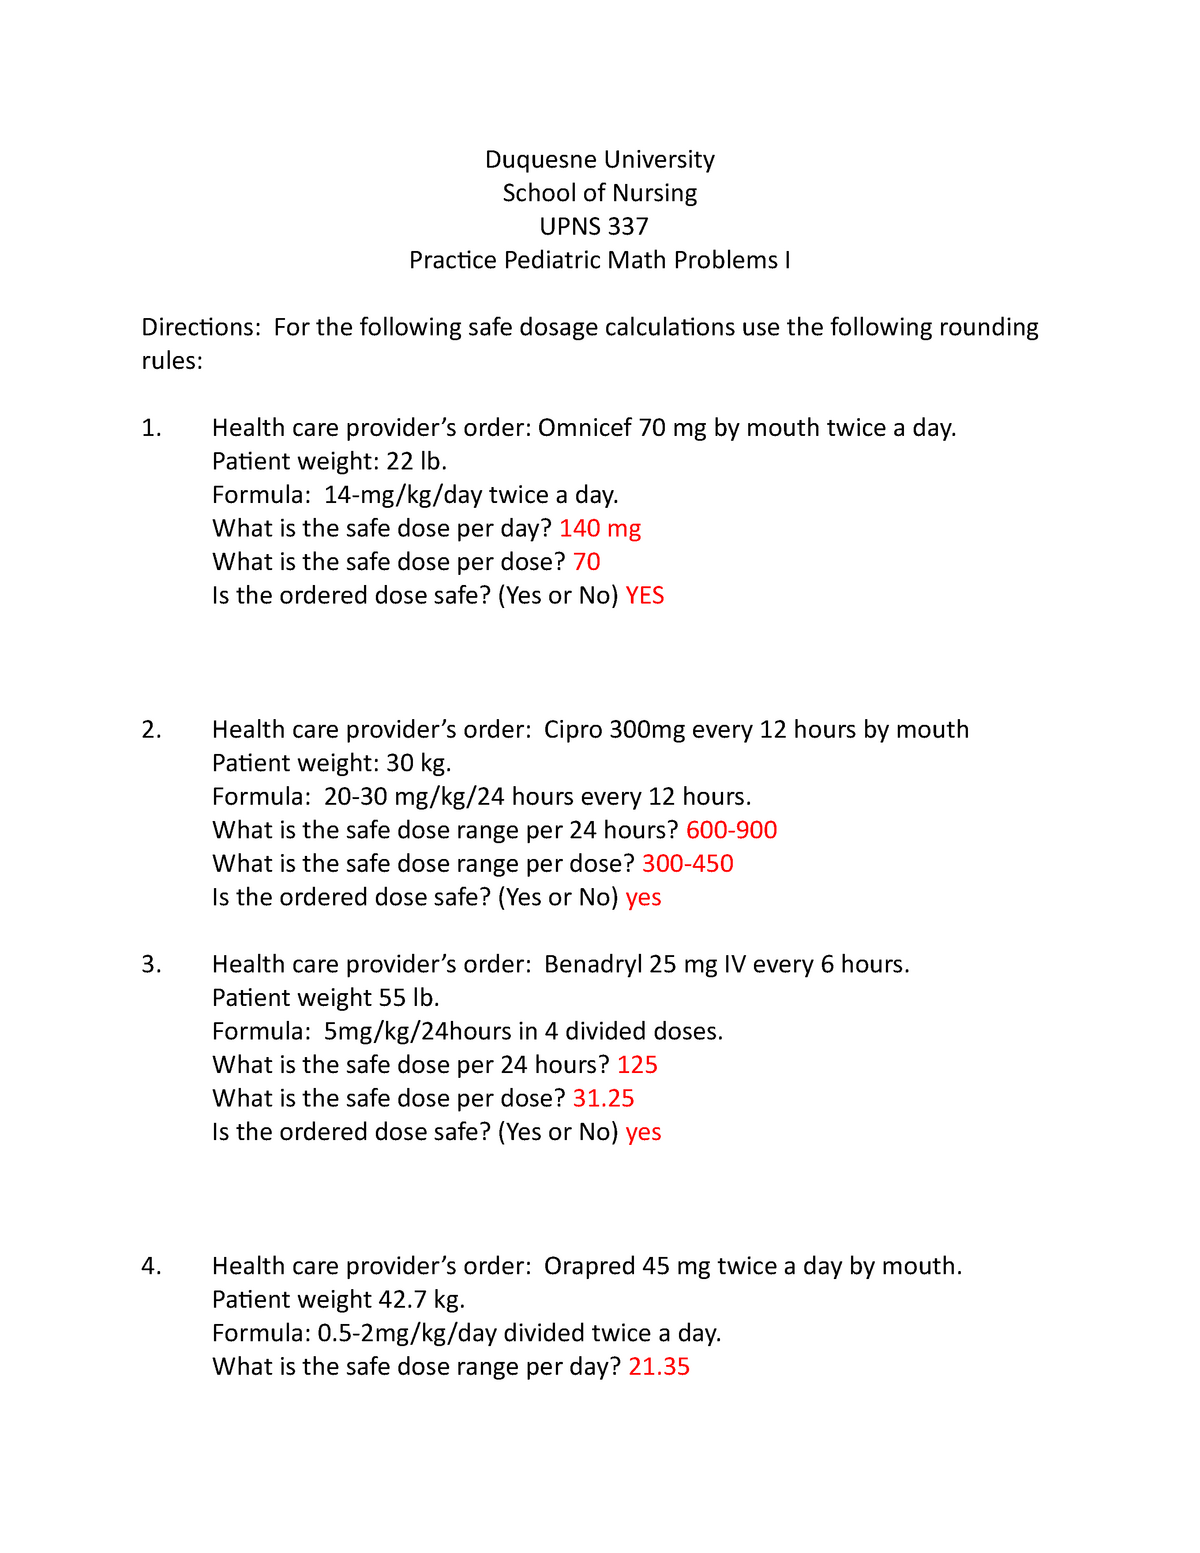 pediatric med math practice questions